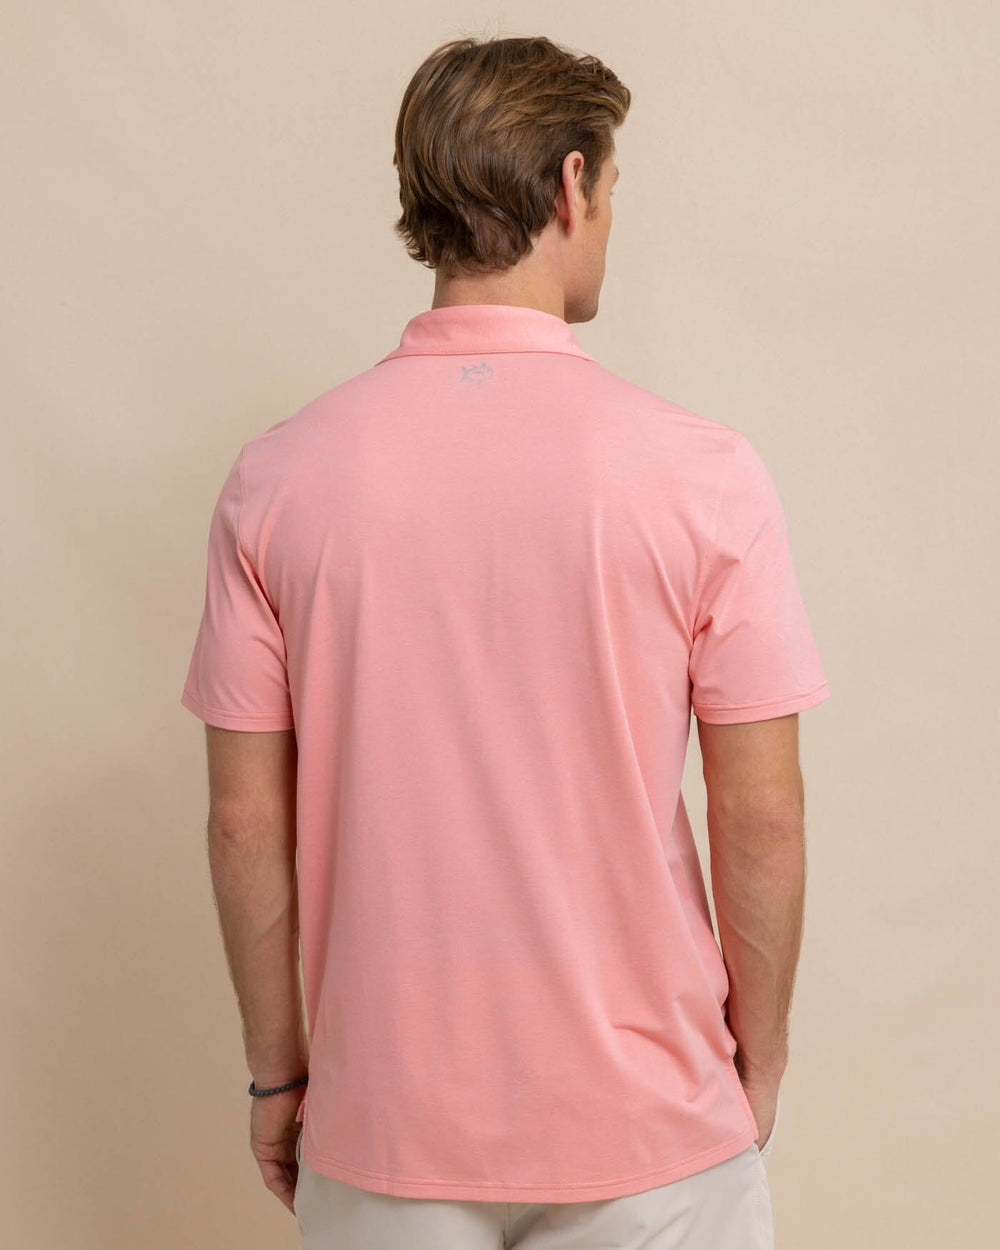 The back view of the Southern Tide brrr-eeze-heather-performance-polo-shirt by Southern Tide - Heather Flamingo Pink